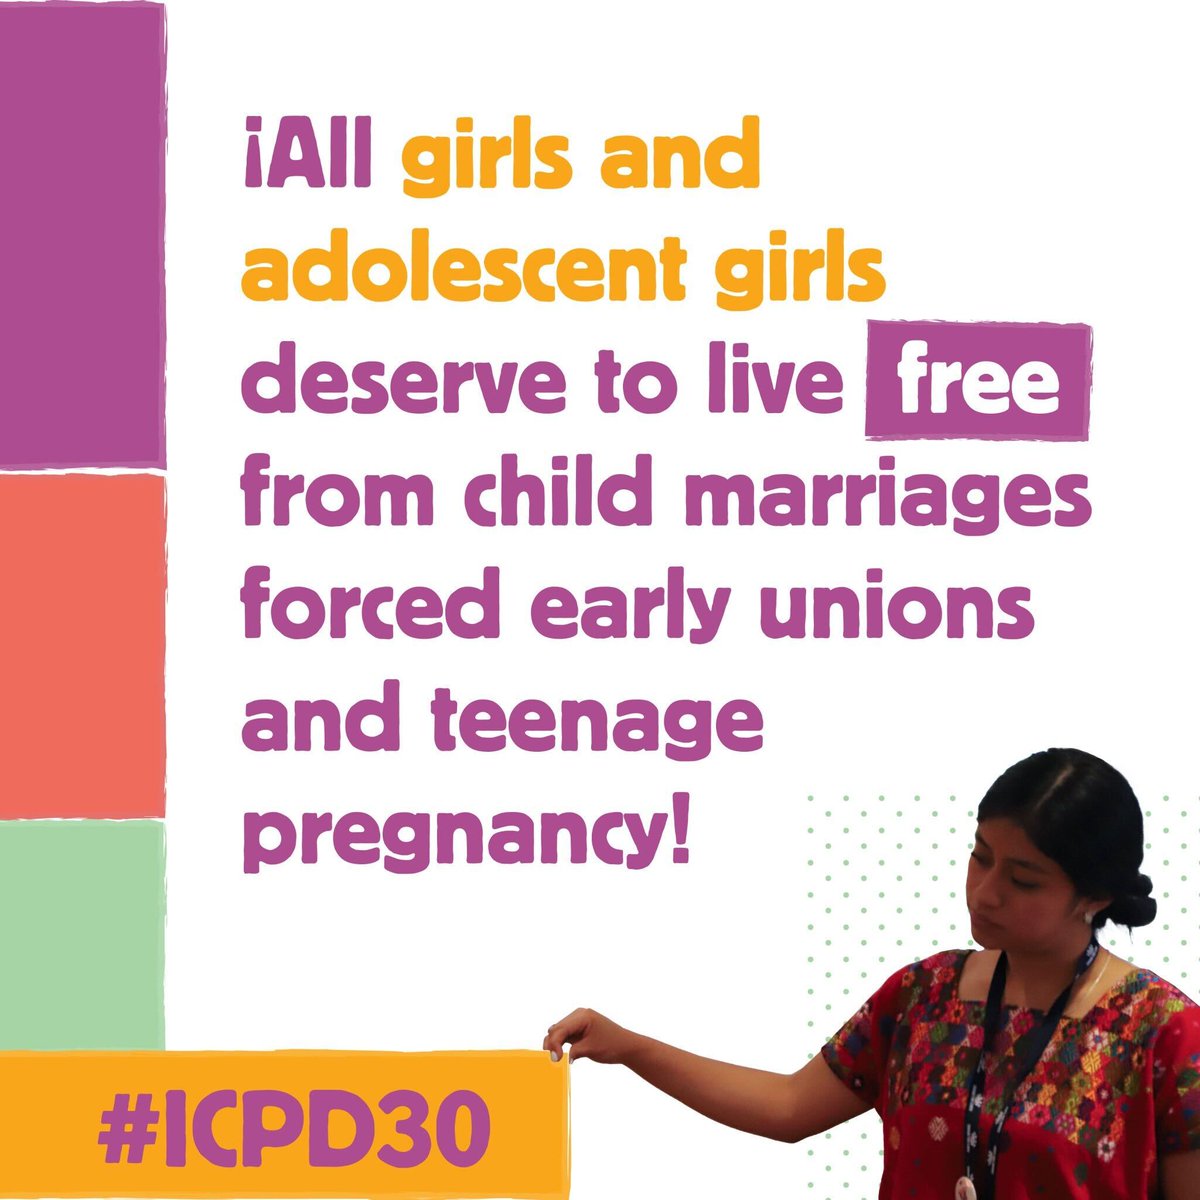 Thrilled to share @THPMexico's impact with @GirlsNotBrides in ending child marriage! Backed by 40+ organizations, we're urging governments to invest in community-led-development.

Read more: girlsnotbrides.org/articles/icpd3…

#EndChildMarriage #investincommunities #GirlsNotBrides